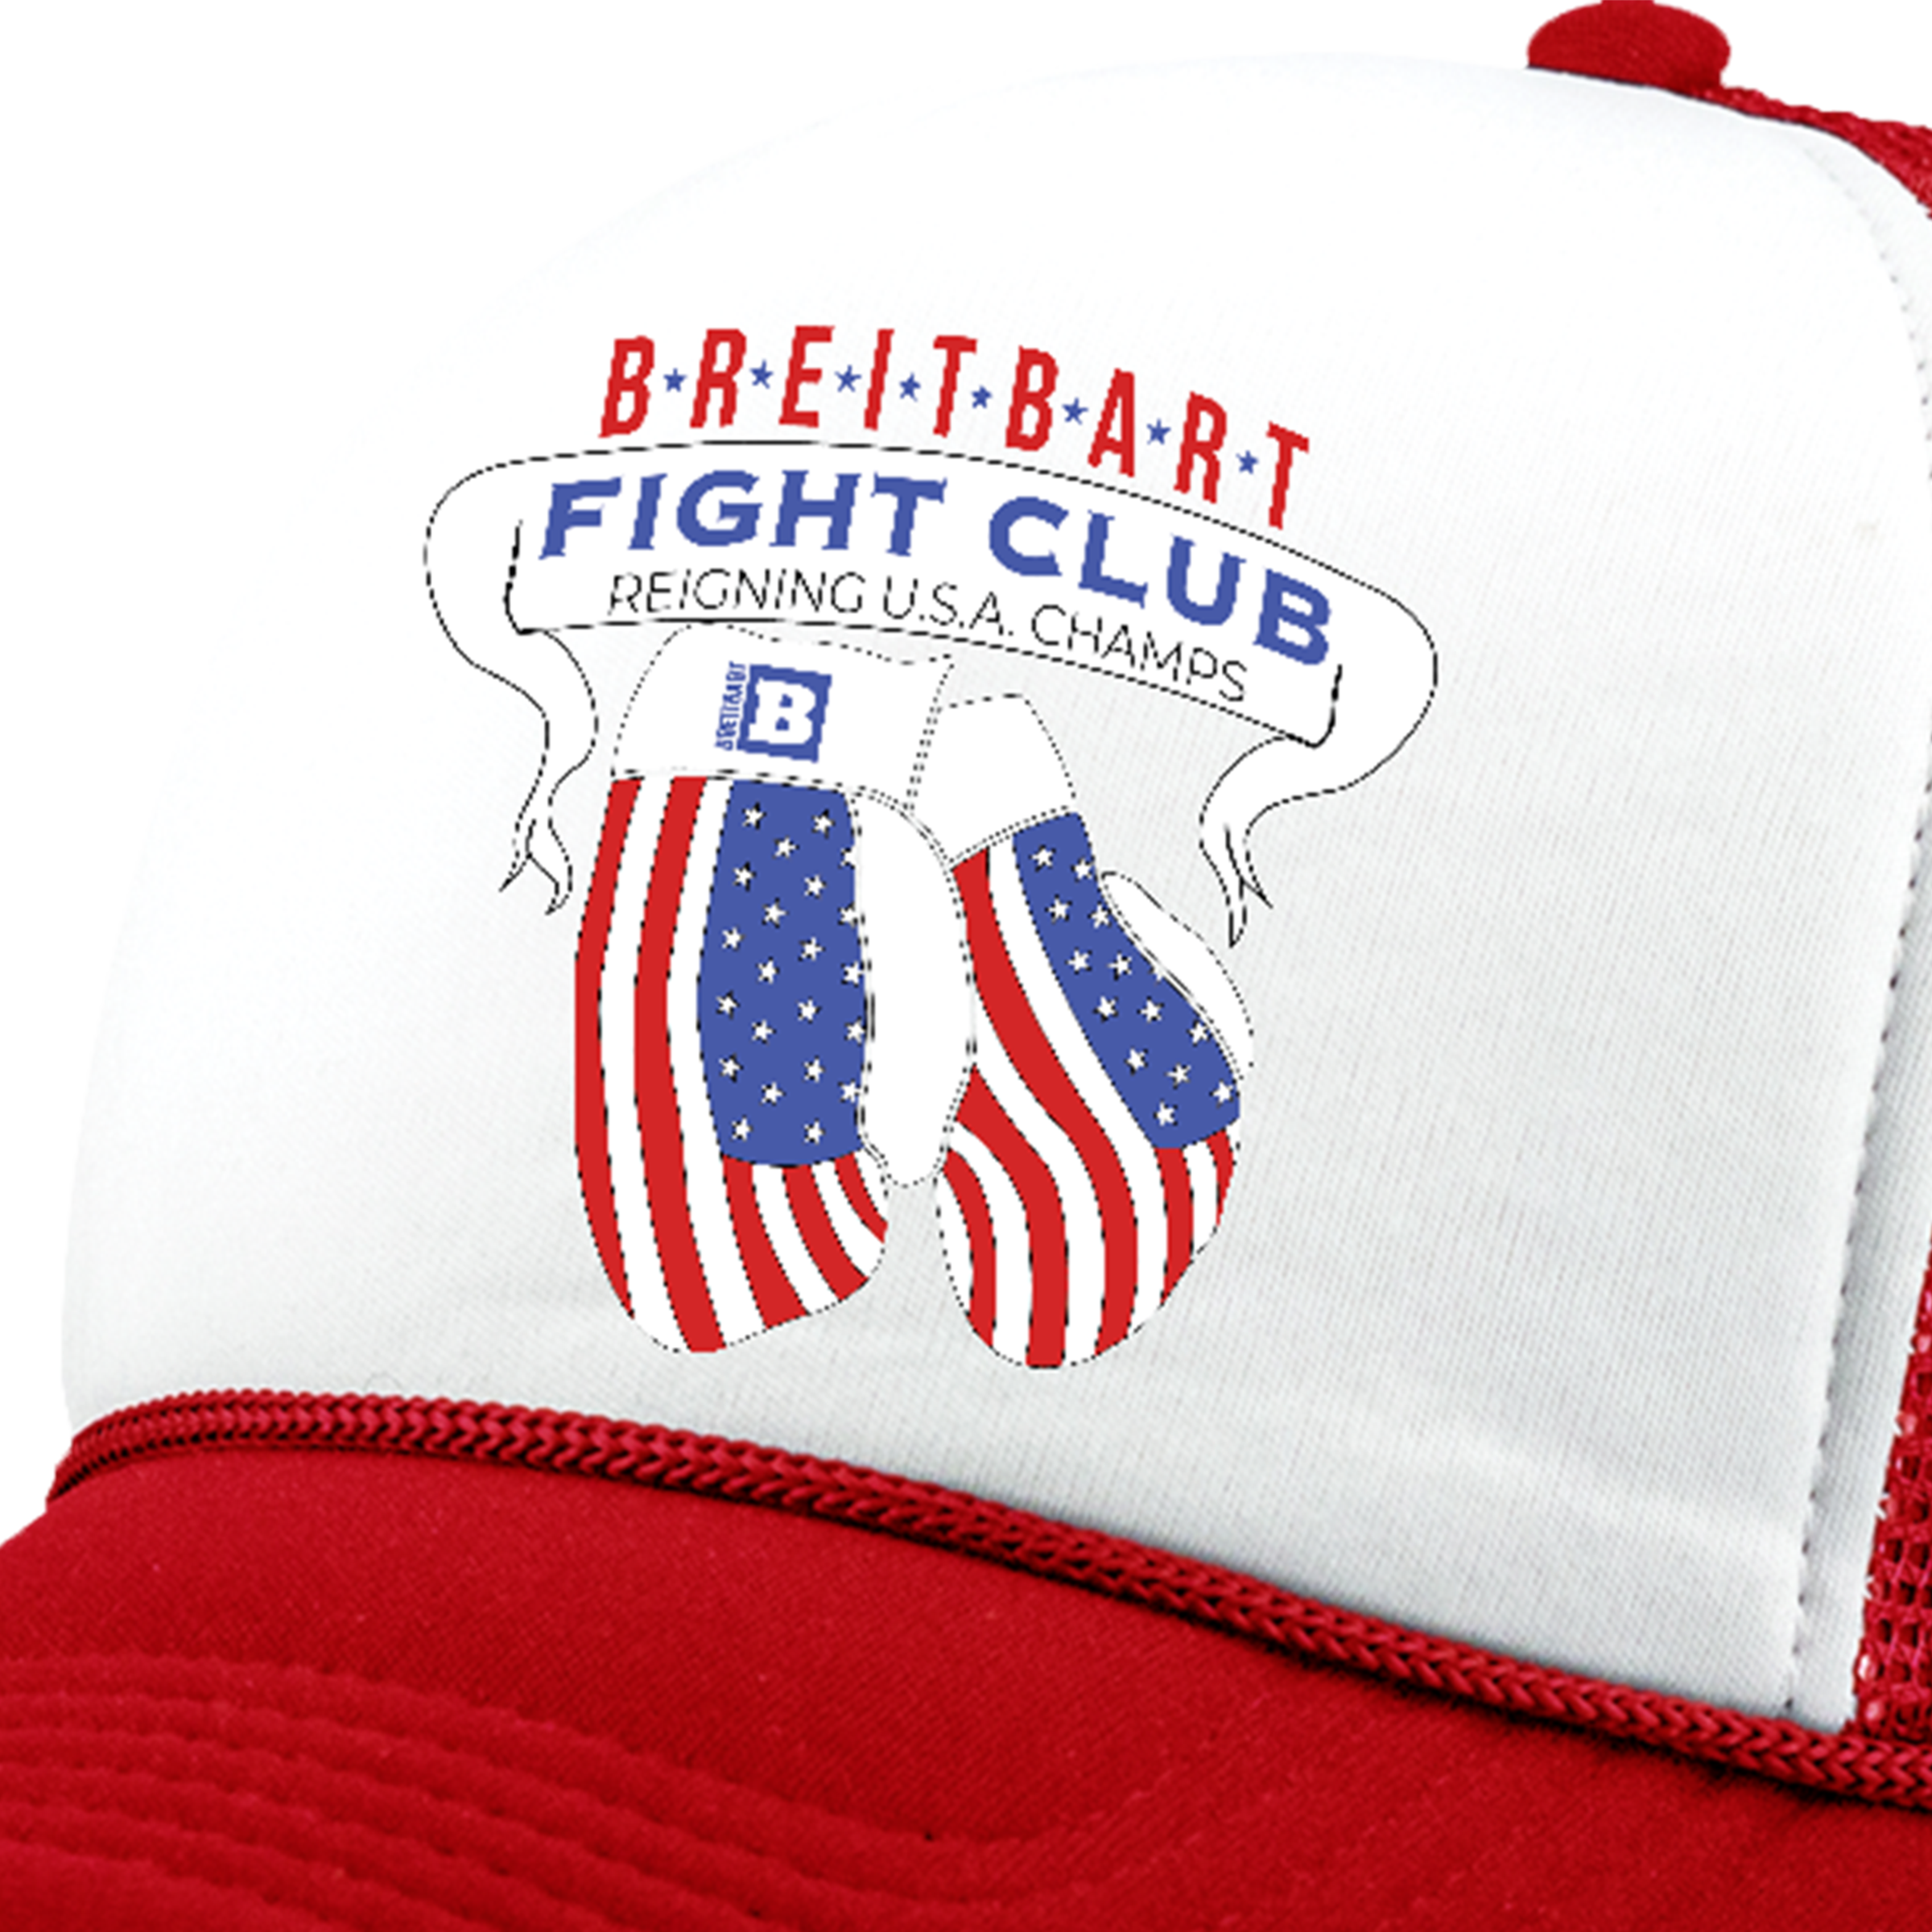 Breitbart Fight Club USA Champs Hat - Red